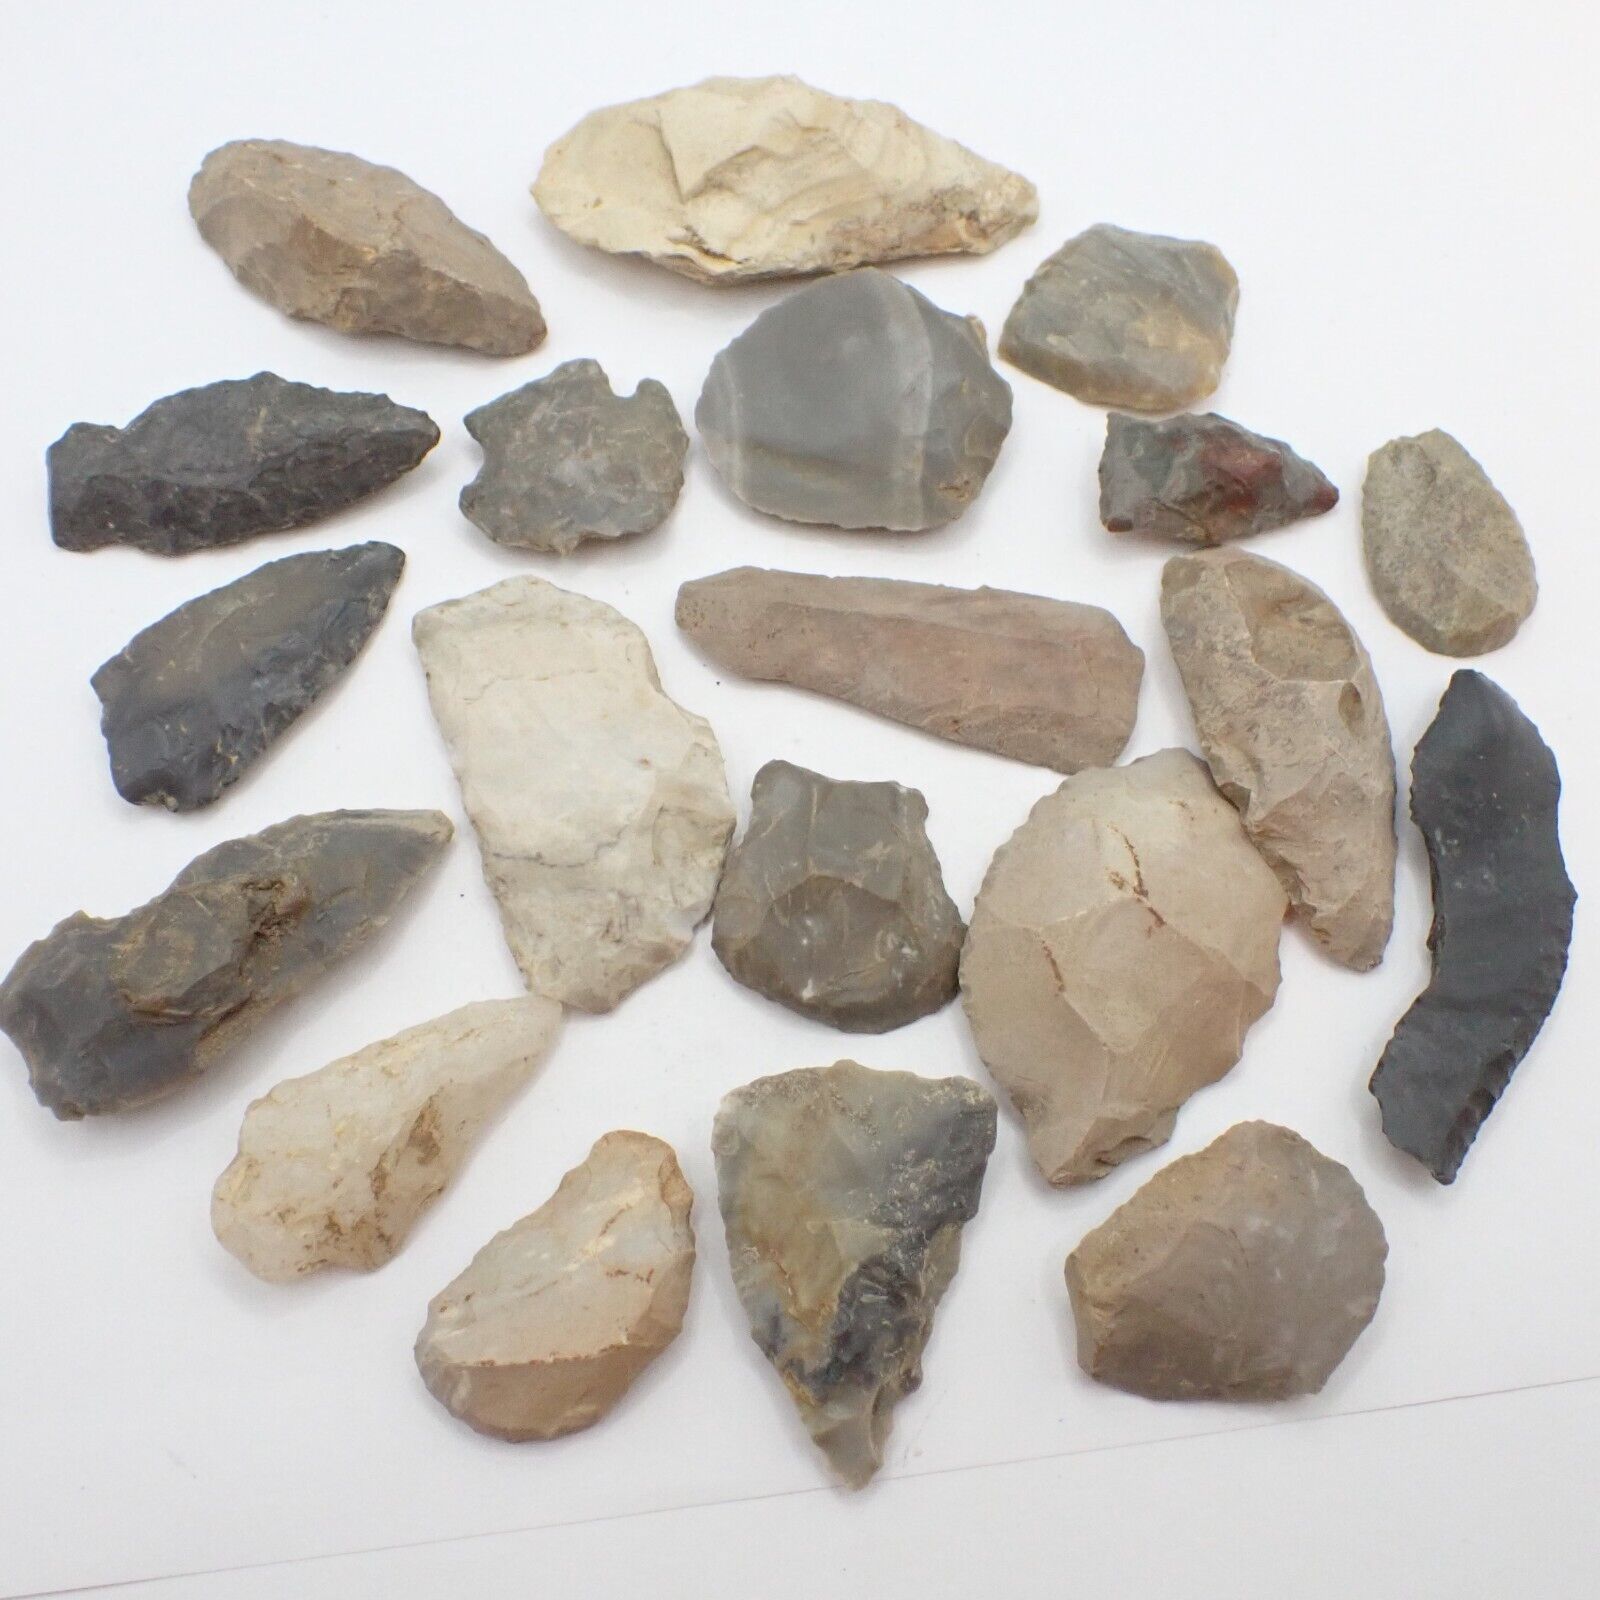 20 pcs LOT mixed ancient flint stone artifacts arrowheads tools old collection